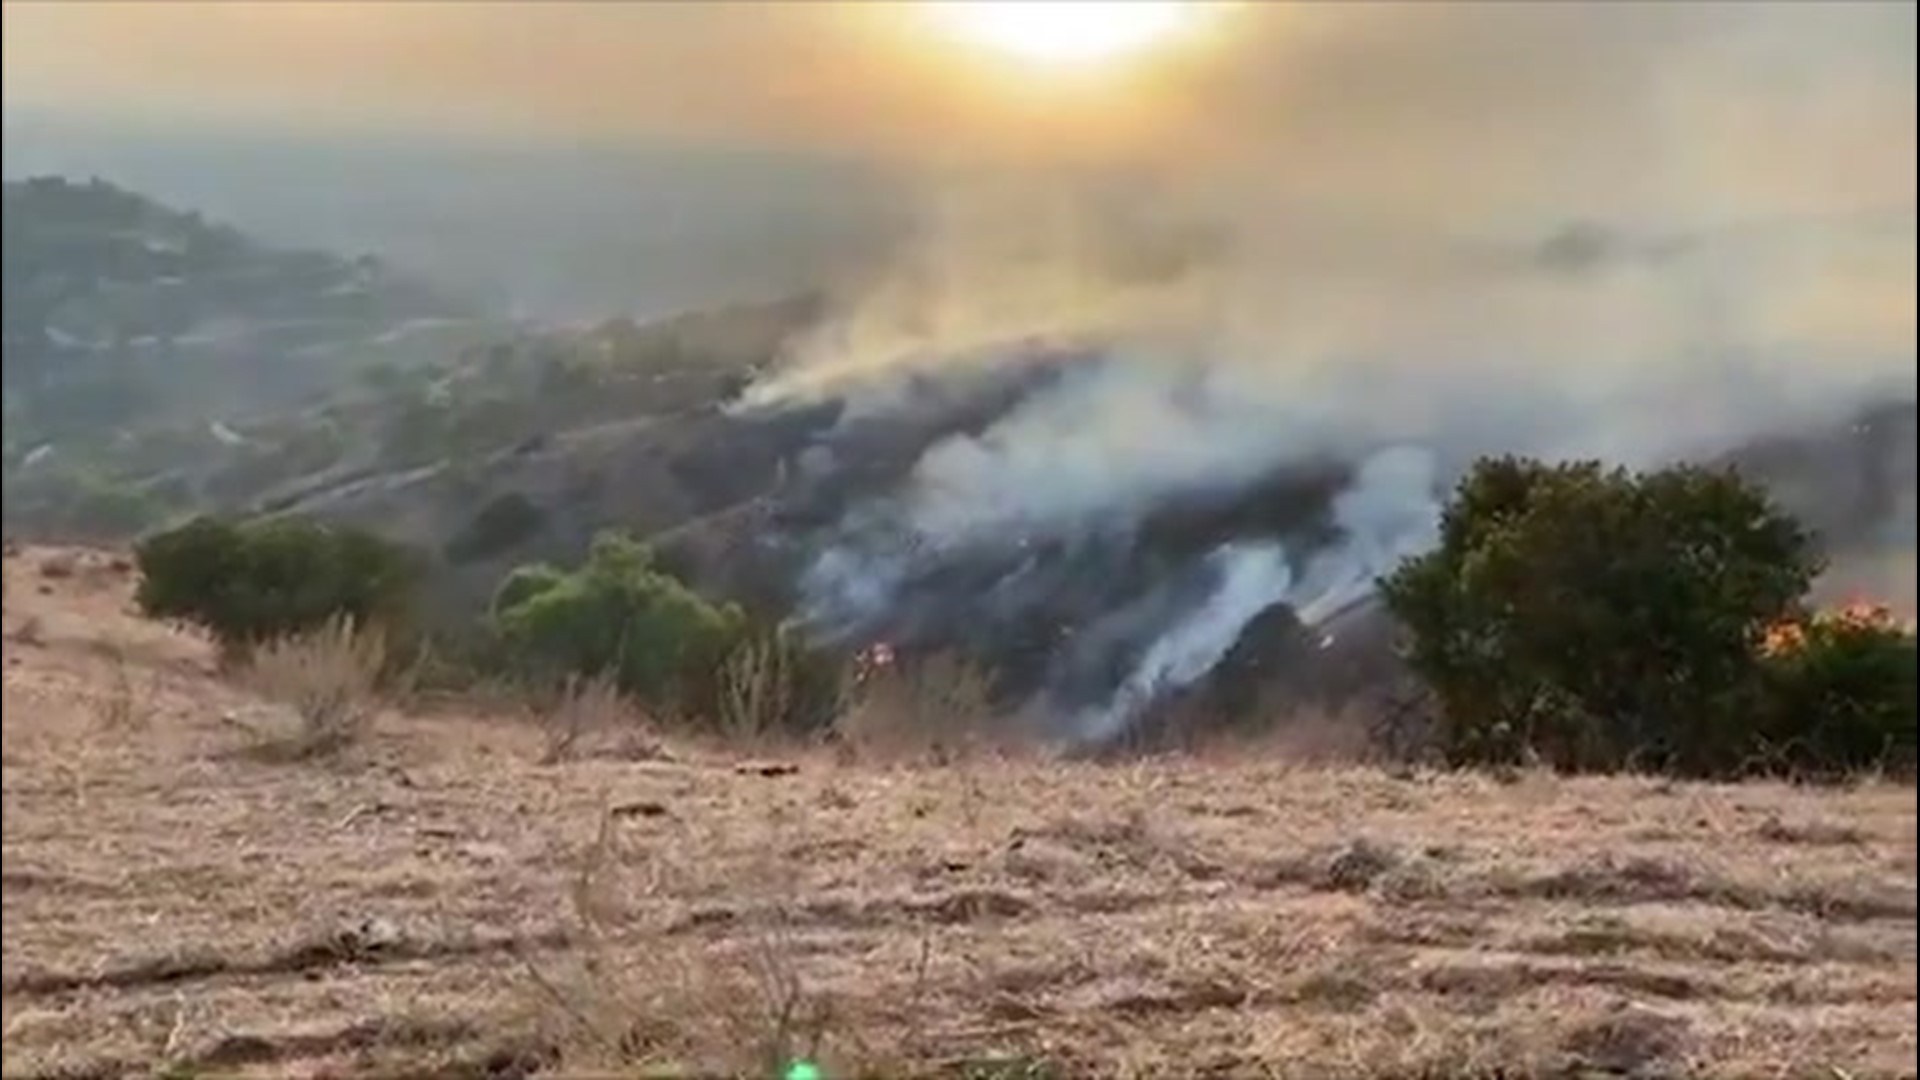 A small vegetation fire in Orange County, California grew to 6 acres on Dec. 13, but its progress was quickly stopped by crews with the Brea Fire Department.